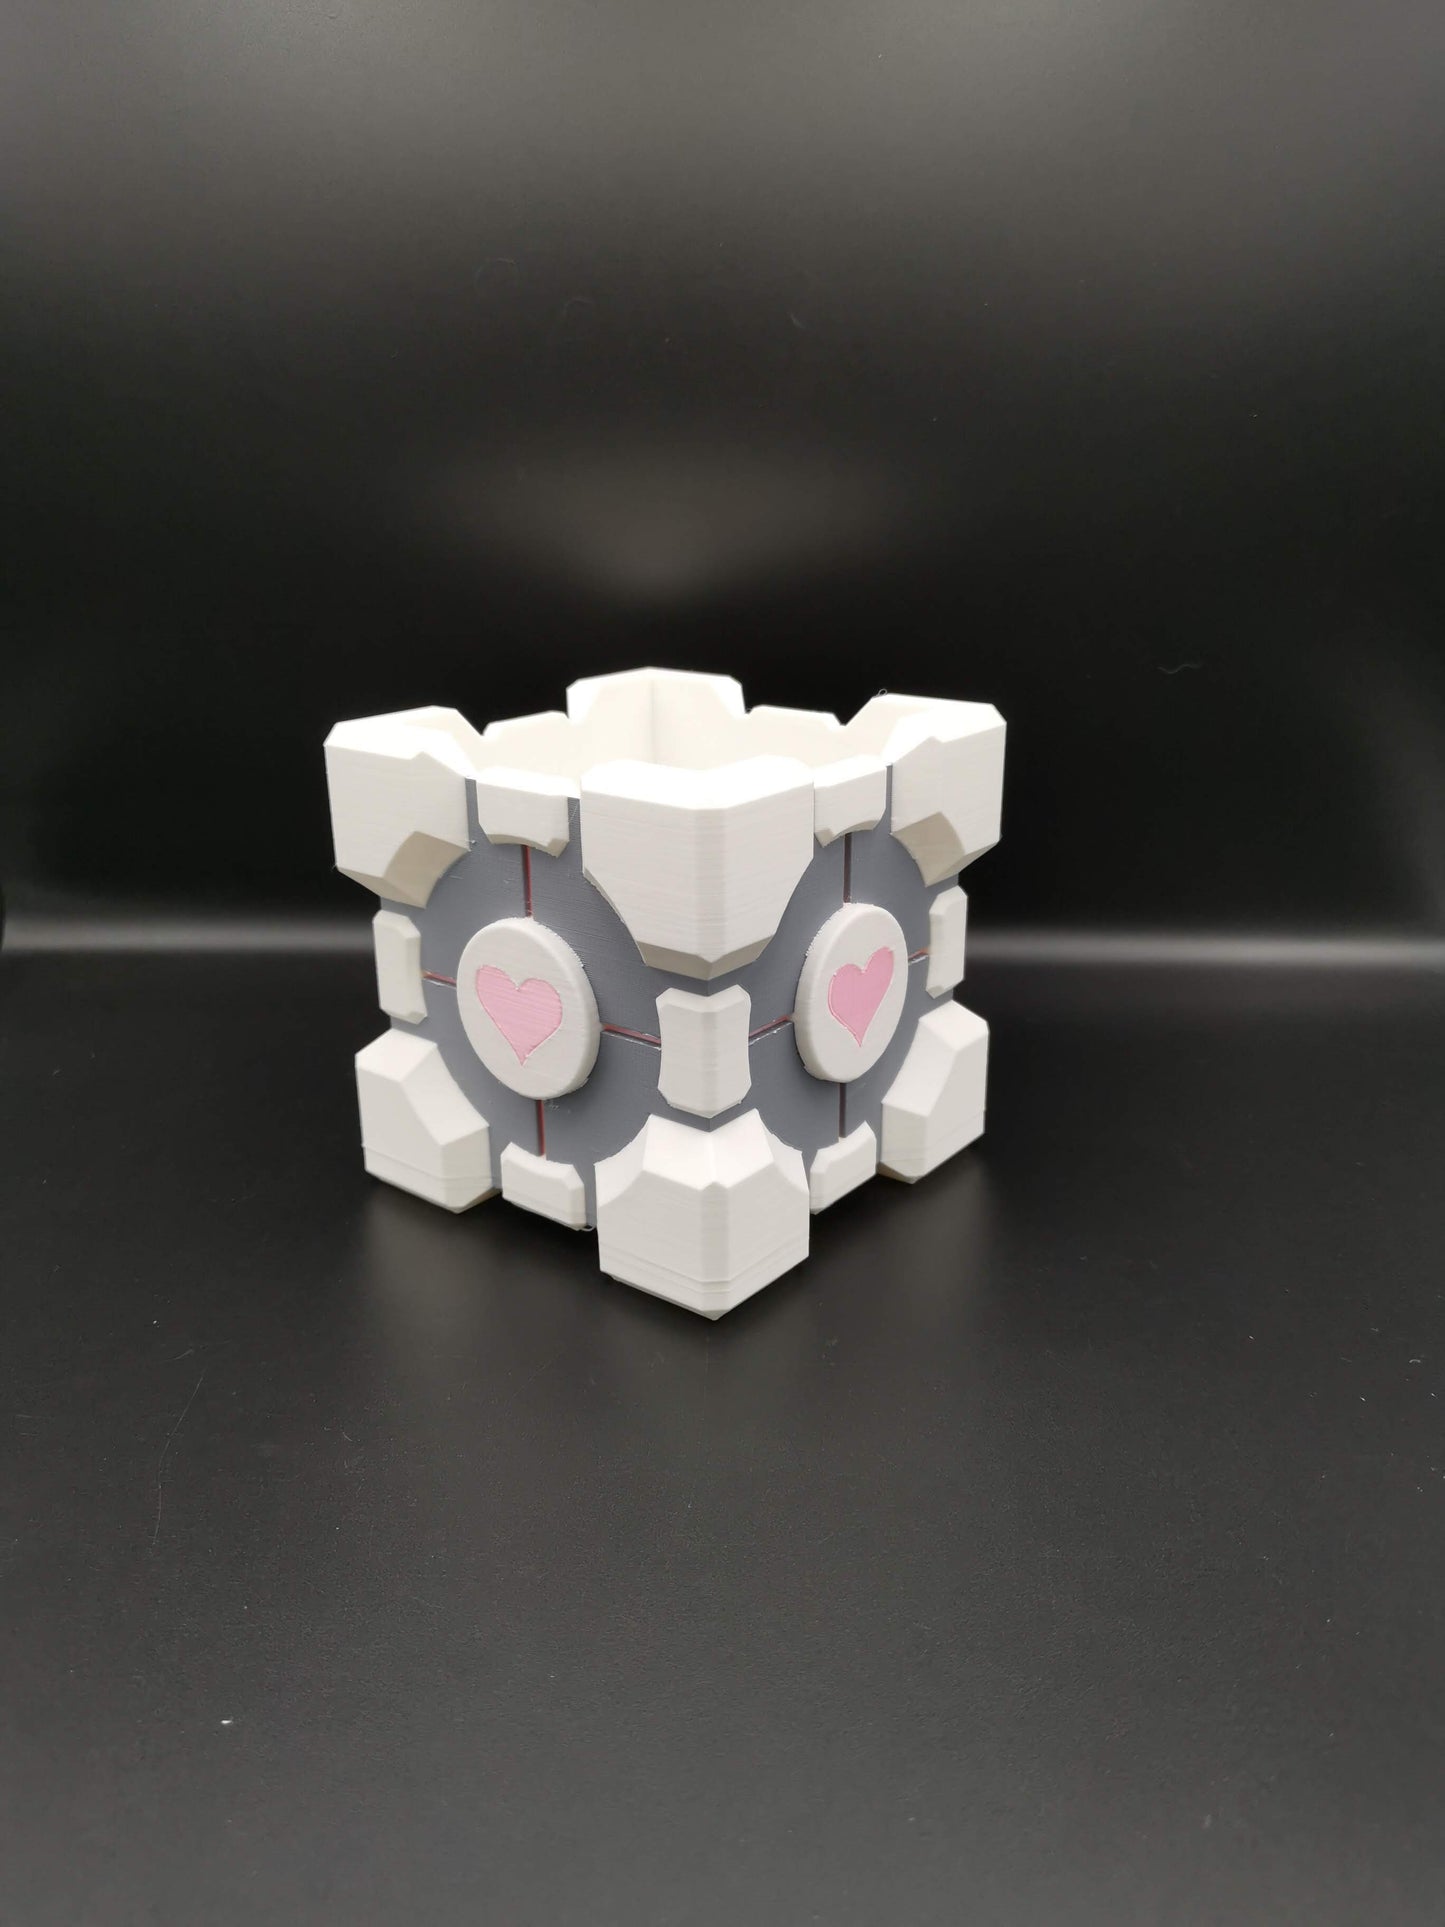 Companion Cube Portal planter from front angle